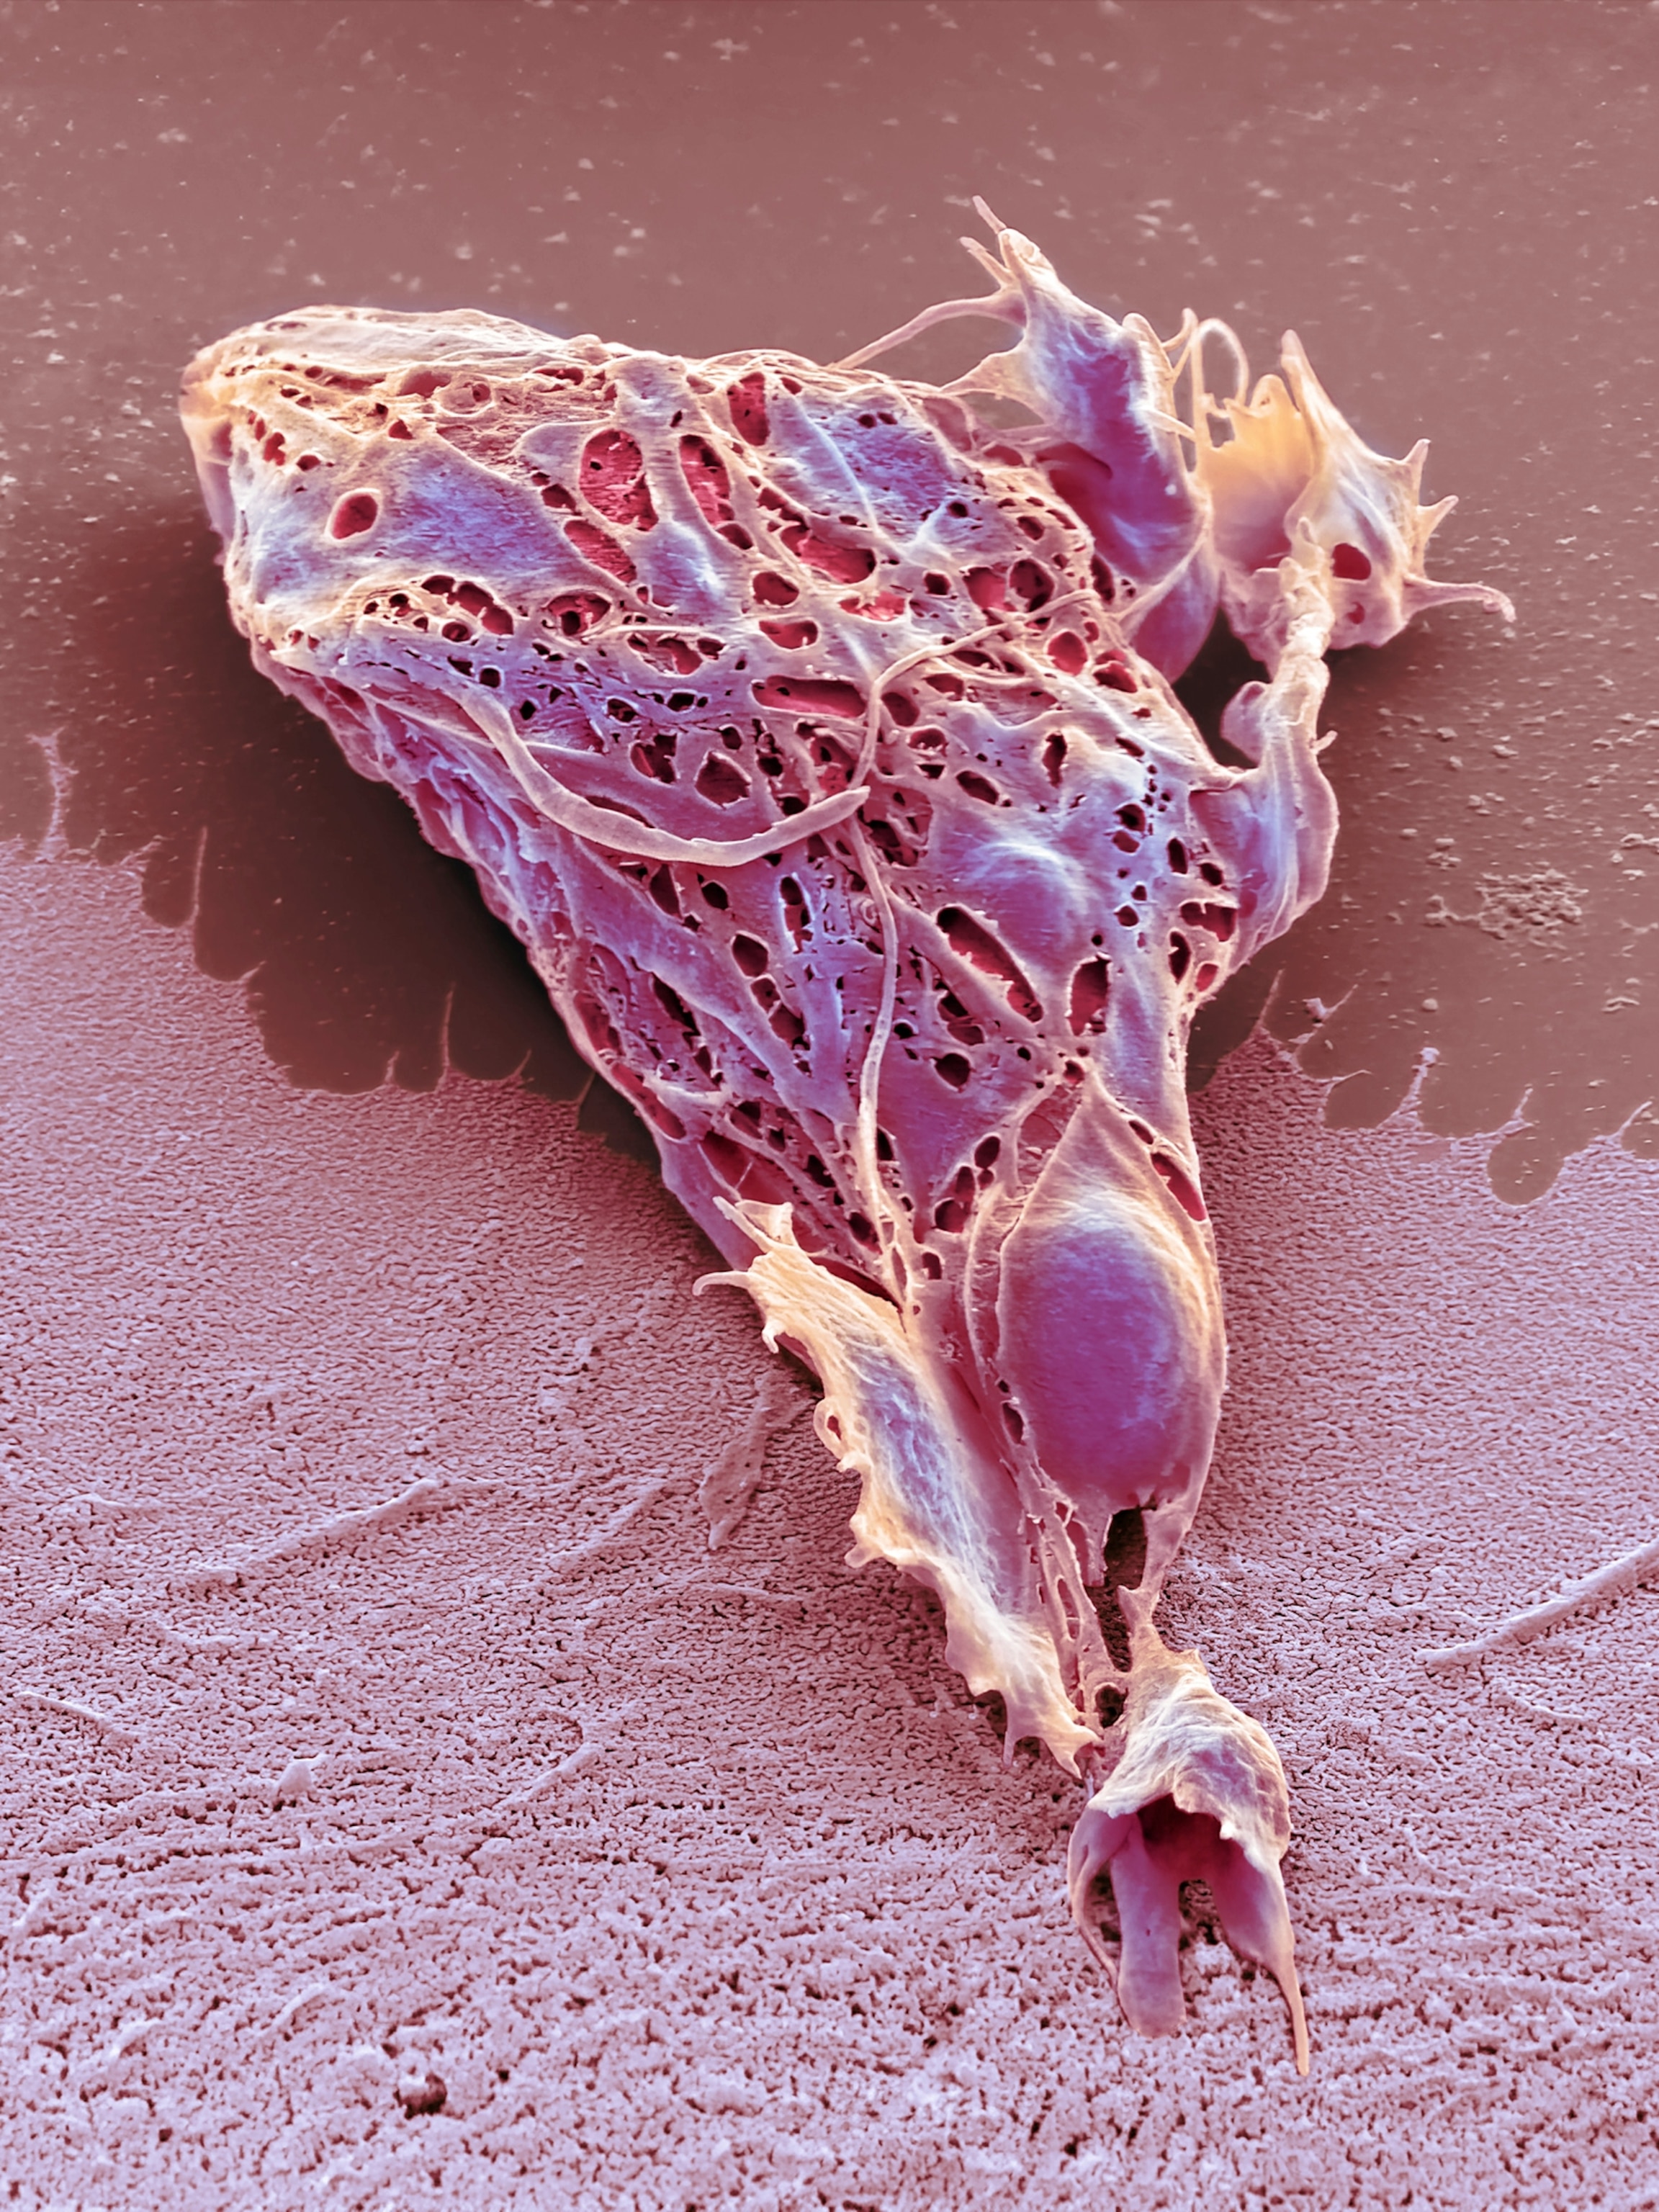 Chemotherapy induced cell death. Coloured scanning electron micrograph (SEM) of a cultured cancer cell (HeLa) treated with doxorubicin to cause necrosis.